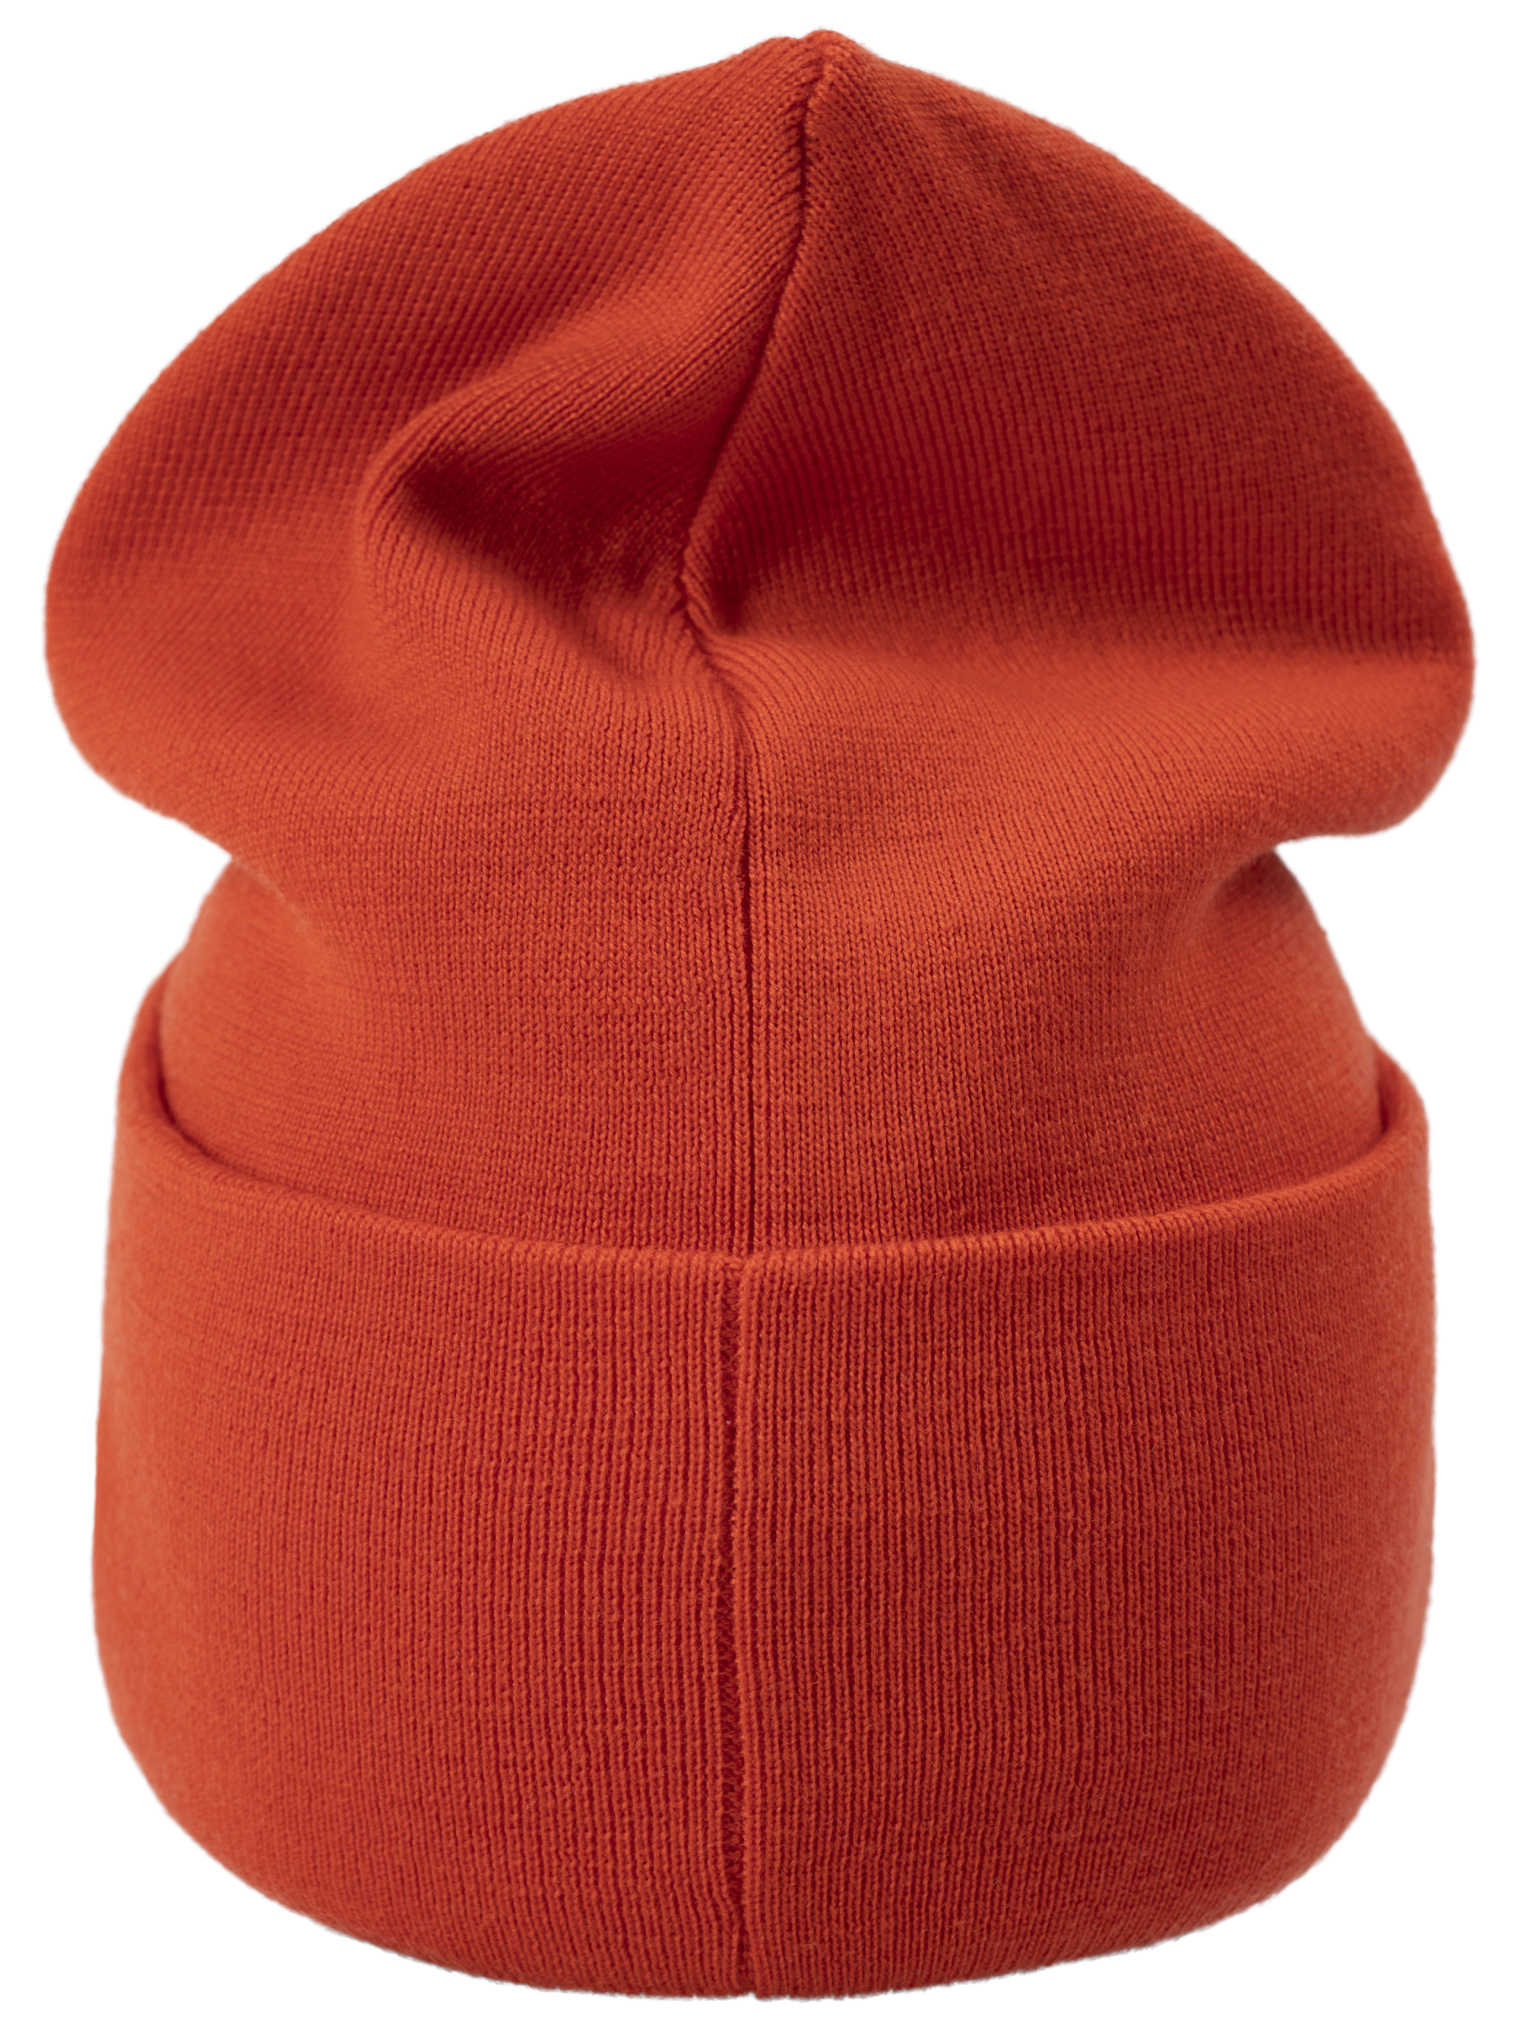 OAMC Wool beanie with patch